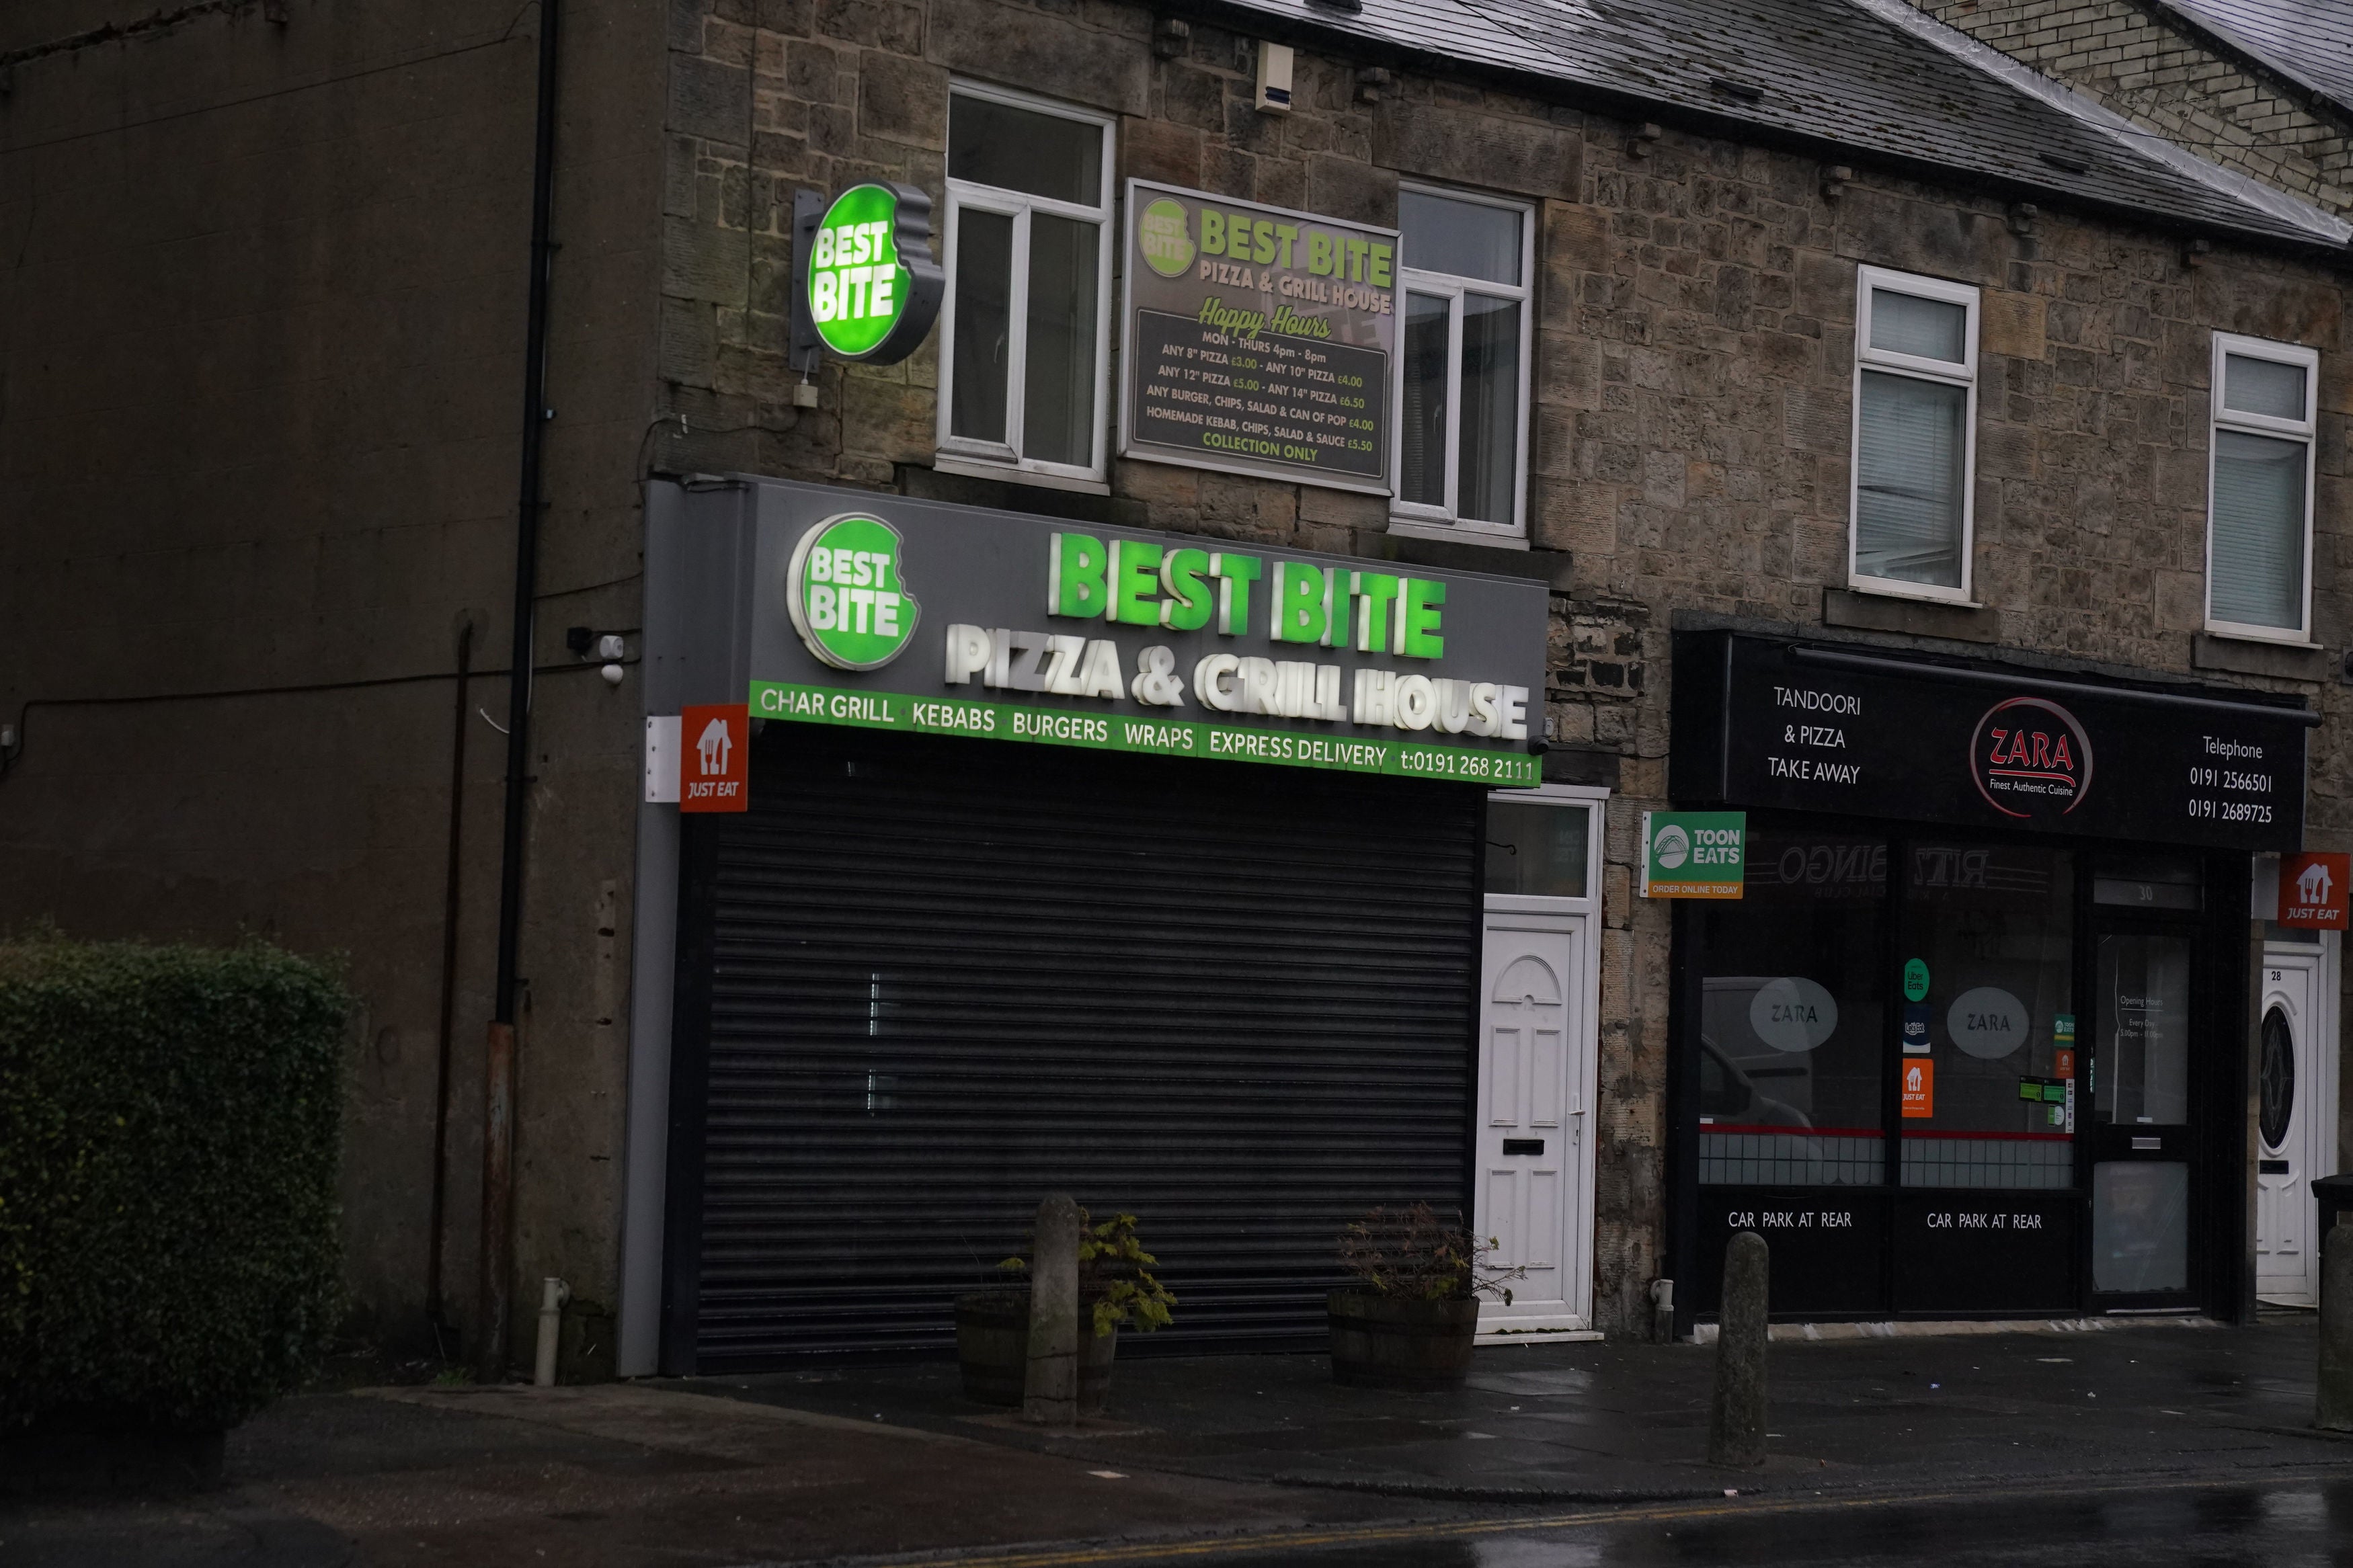 <p>A view of the Best Bite pizza and grill house in the Forest Hall area of Newcastle upon Tyne, one of two addresses raided by armed police as part of their search for Clapham alkali attack suspect Abdul Ezedi</p>